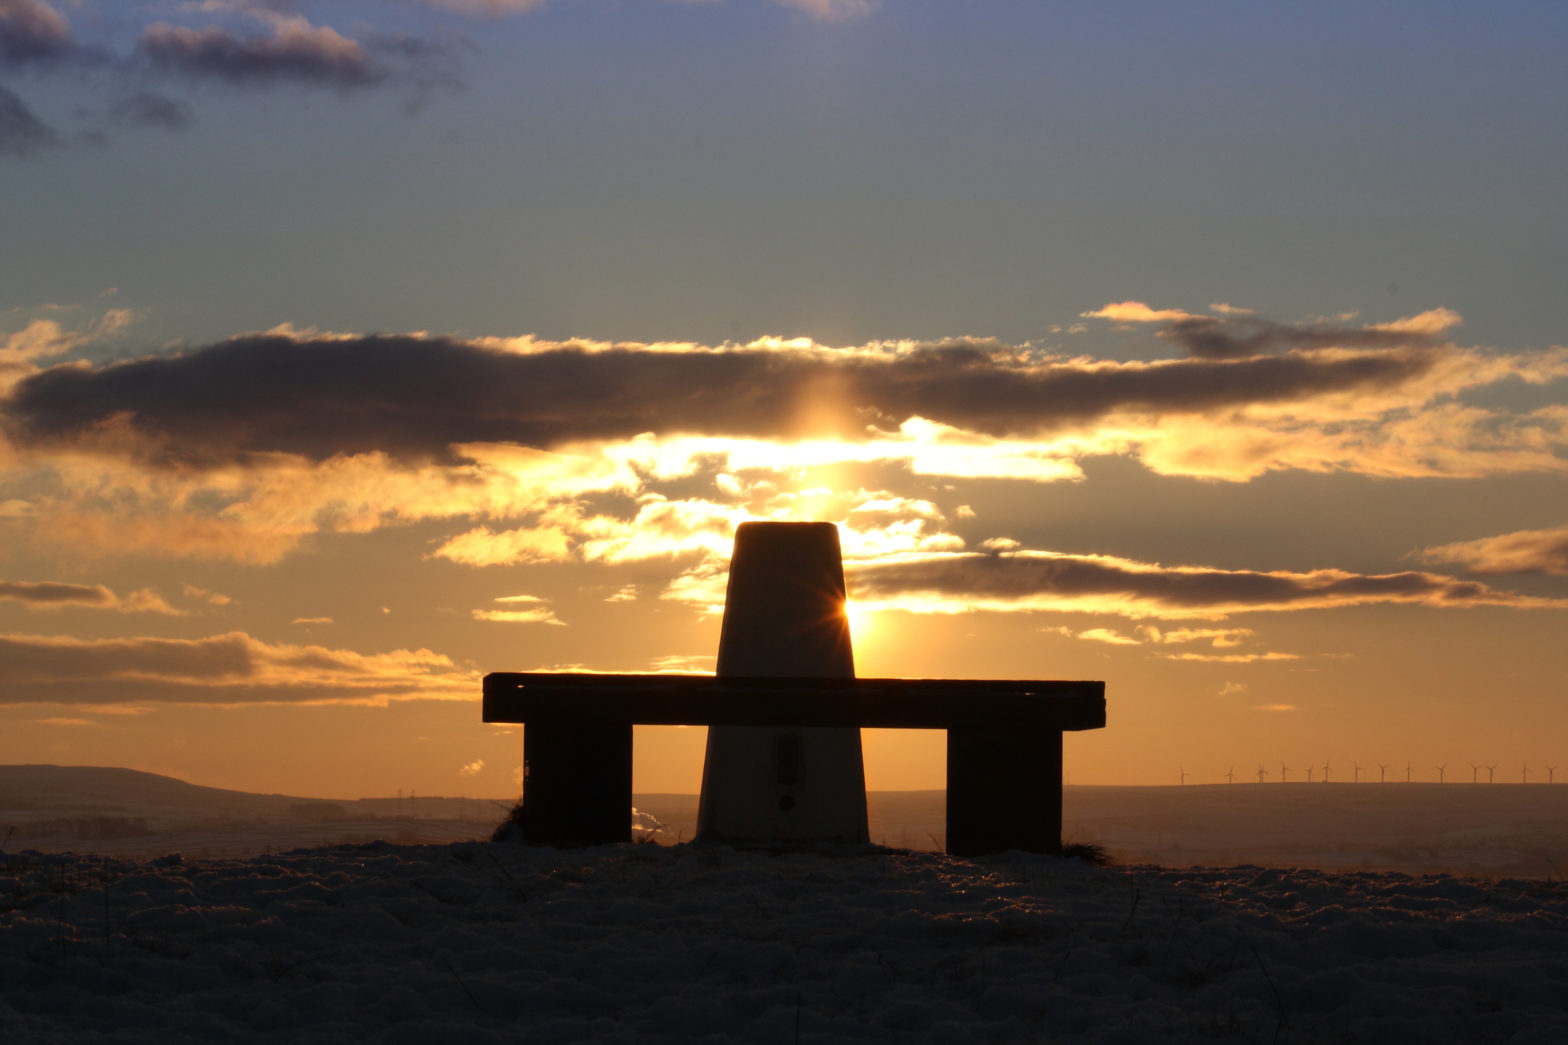 Sunset at the Trig Point